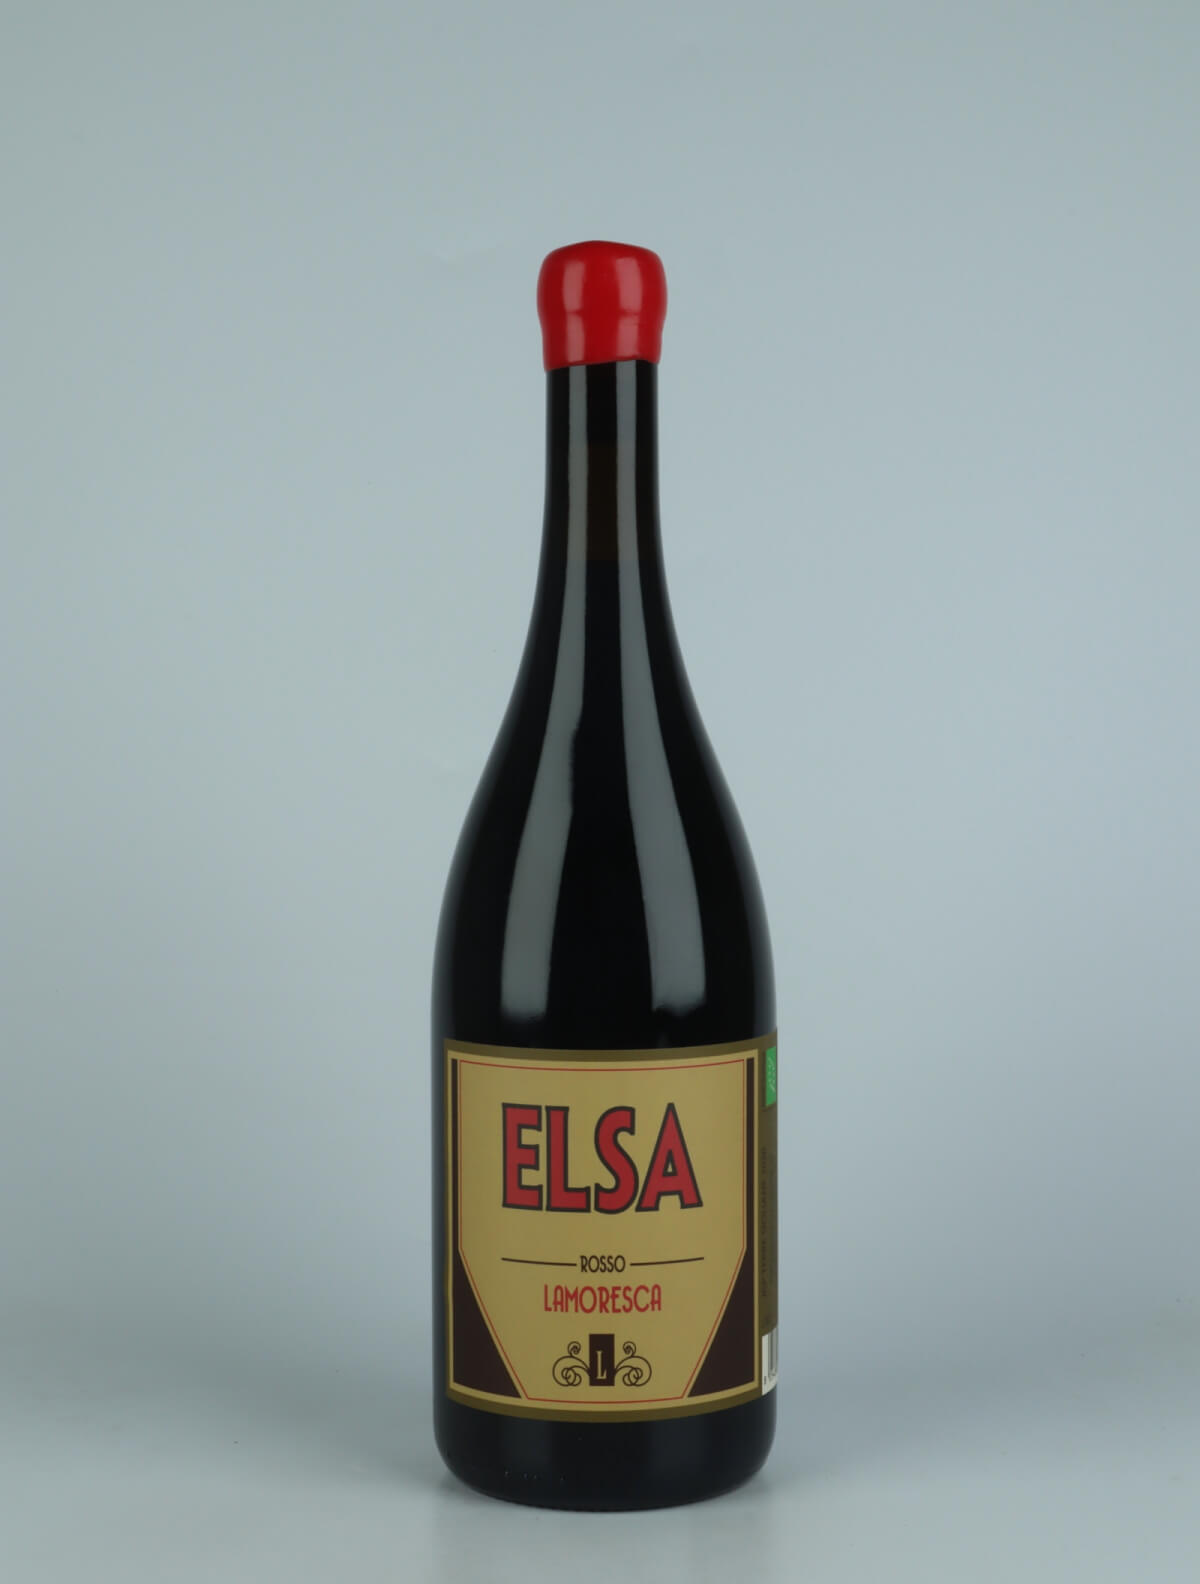 A bottle 2020 Elsa Red wine from Lamoresca, Sicily in Italy